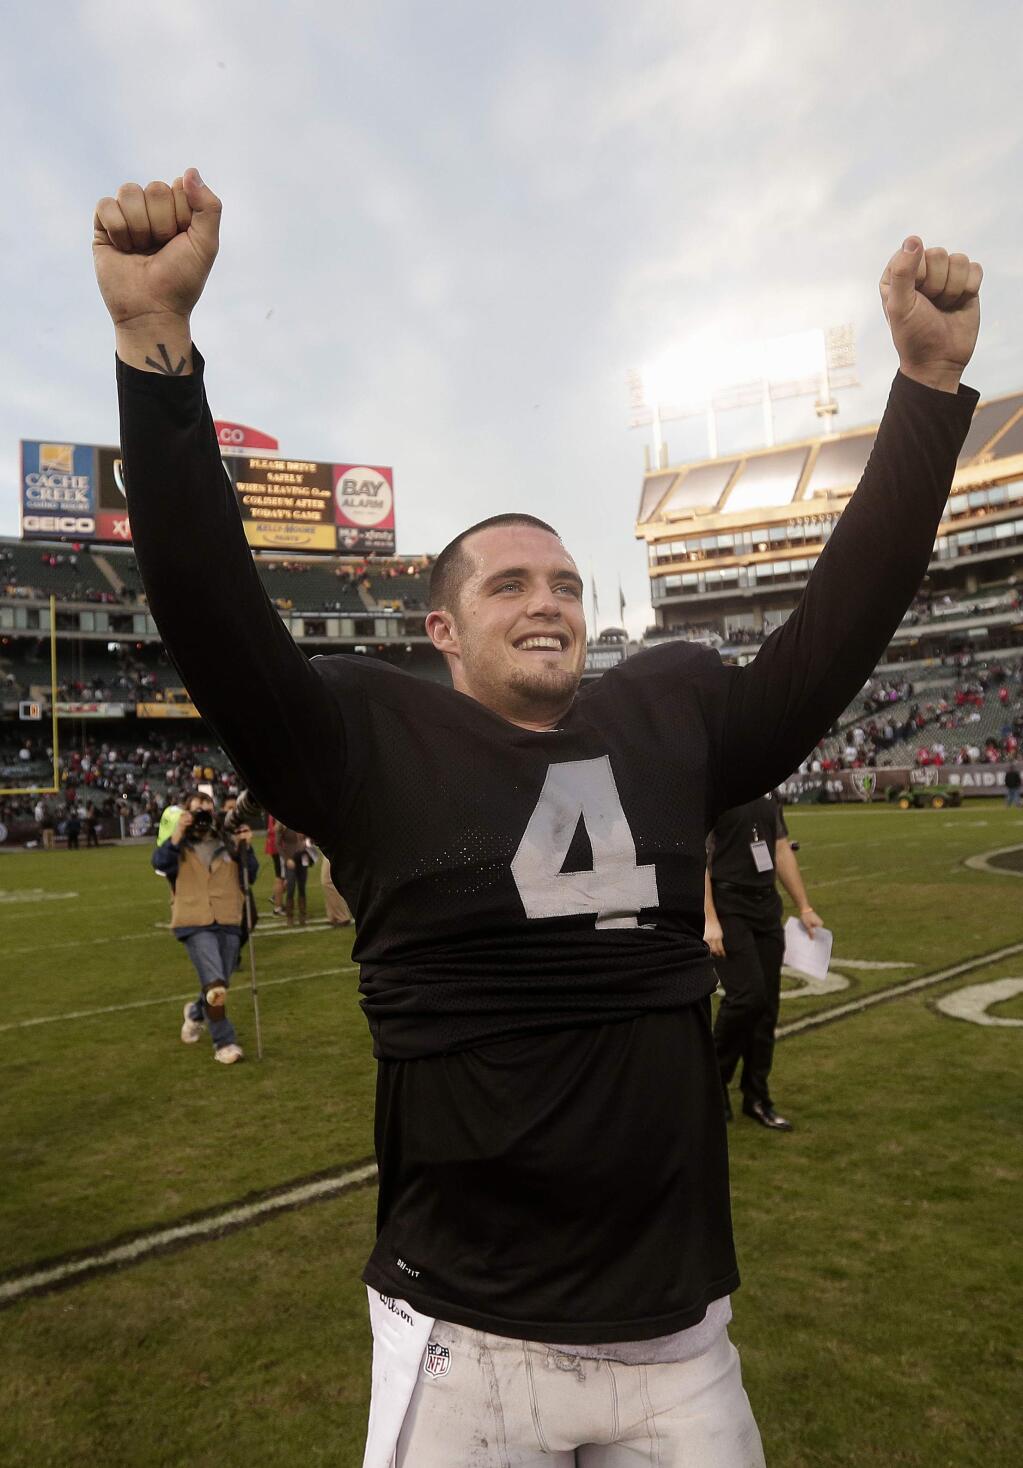 Oakland Raiders quarterback Derek Carr (4) celebrates after the Raiders defeated the San Francisco 49ers in an NFL football game in Oakland, Calif., Sunday, Dec. 7, 2014. The Raiders won 24-13. (AP Photo/Marcio Jose Sanchez)